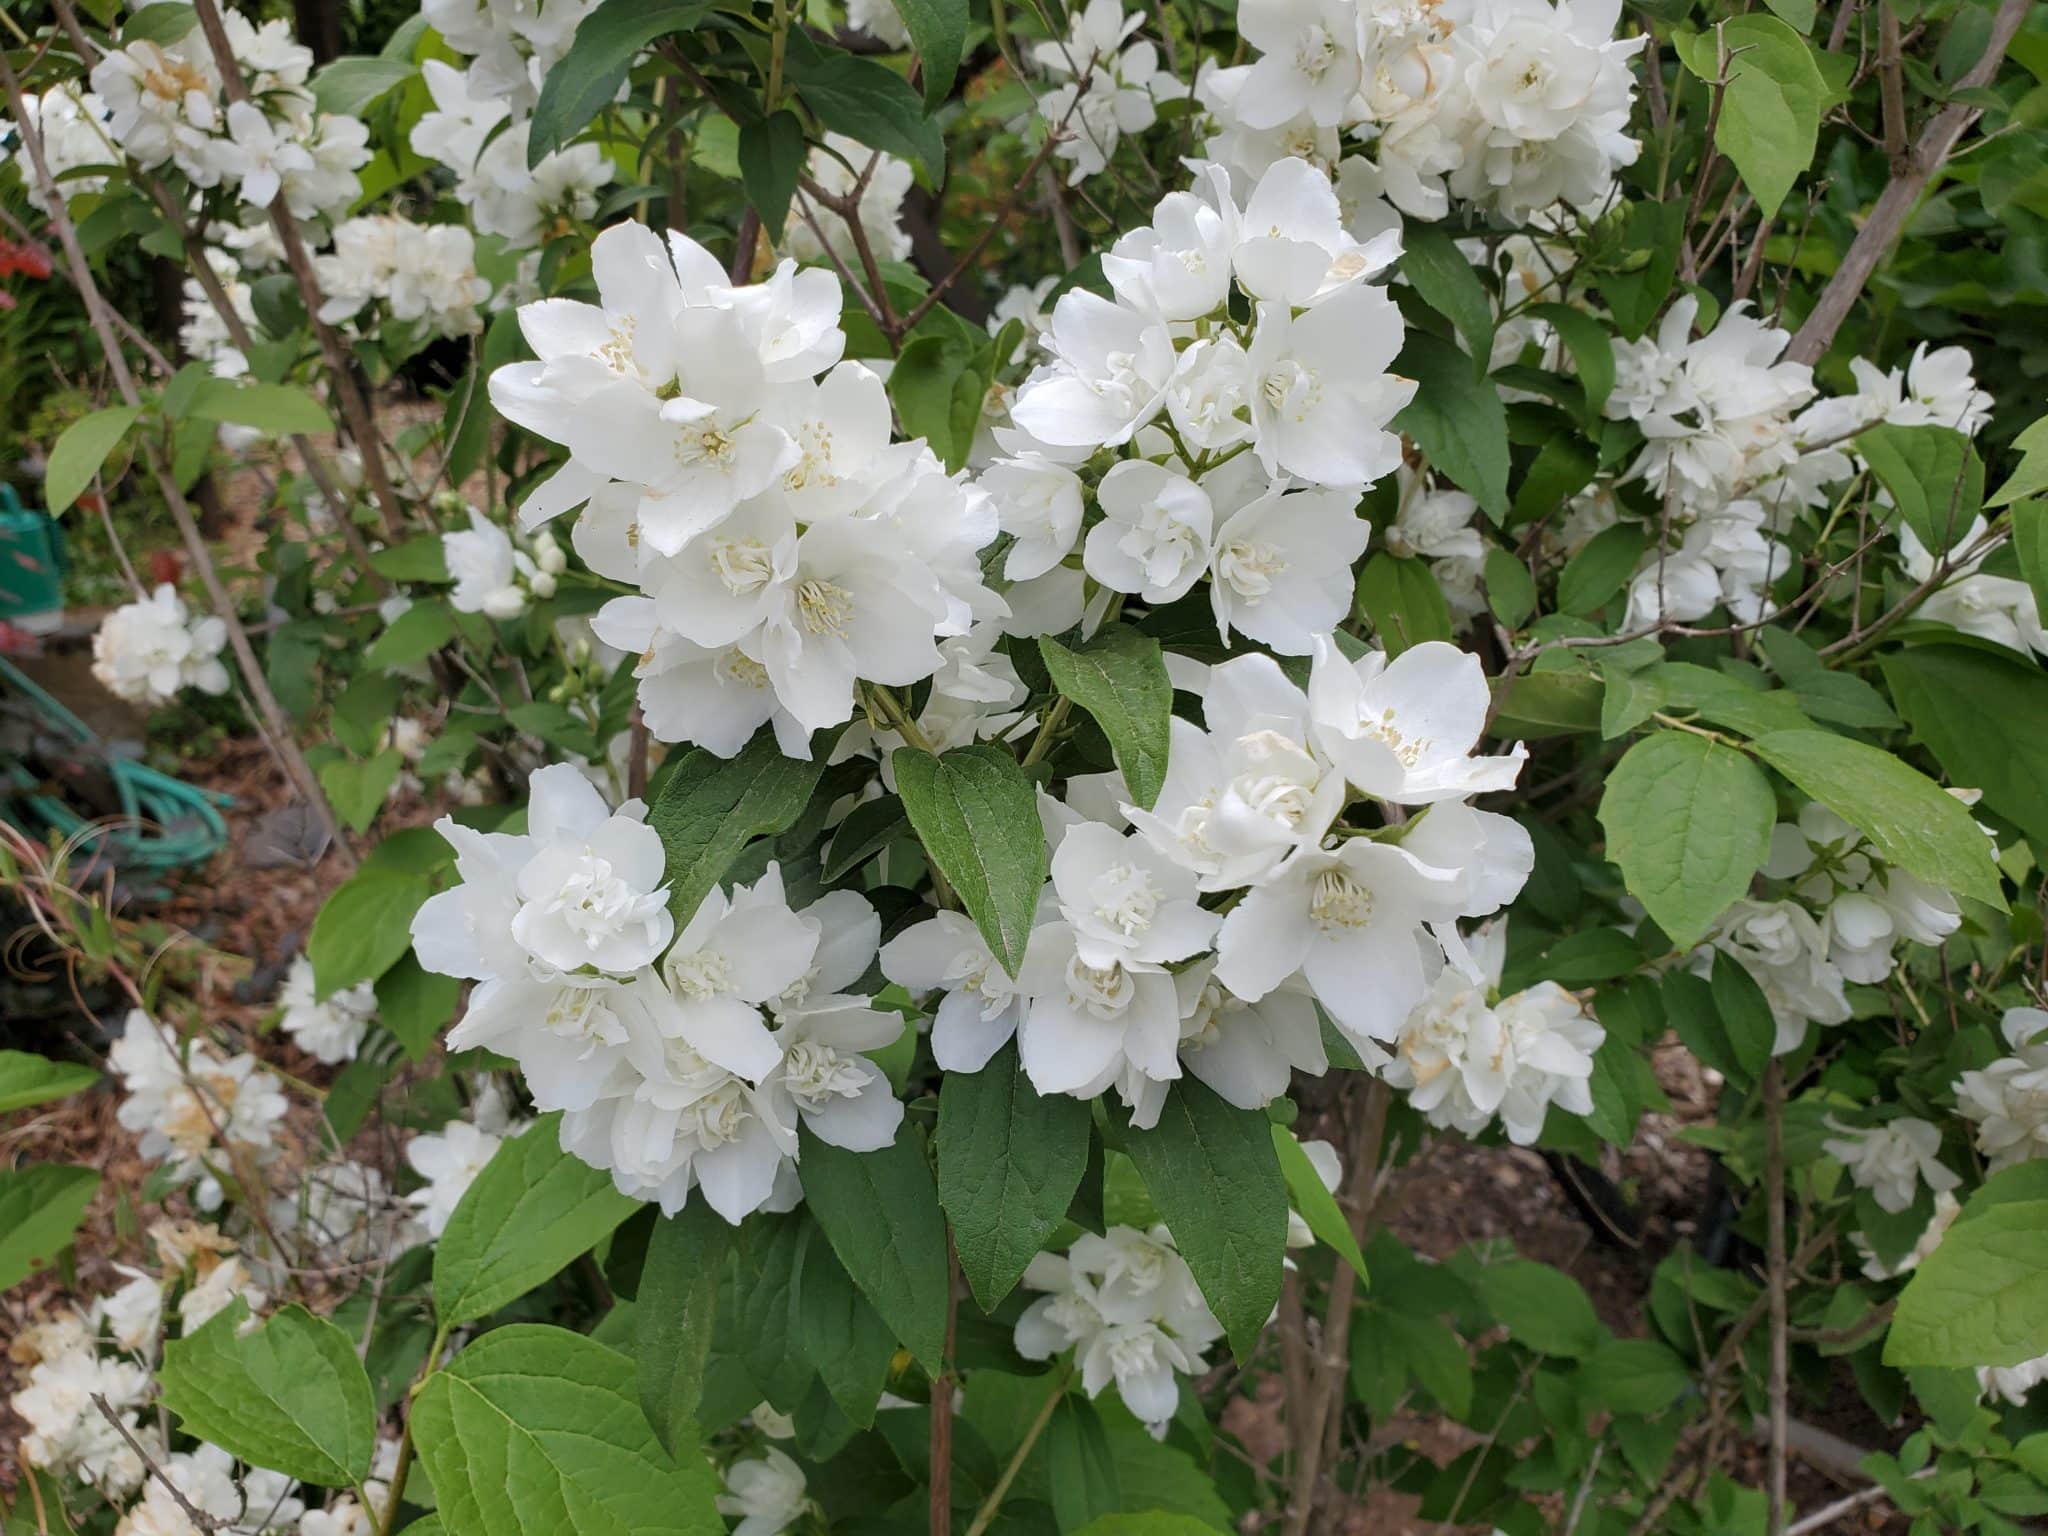 Clusters of small white petals surrounded by leaves.